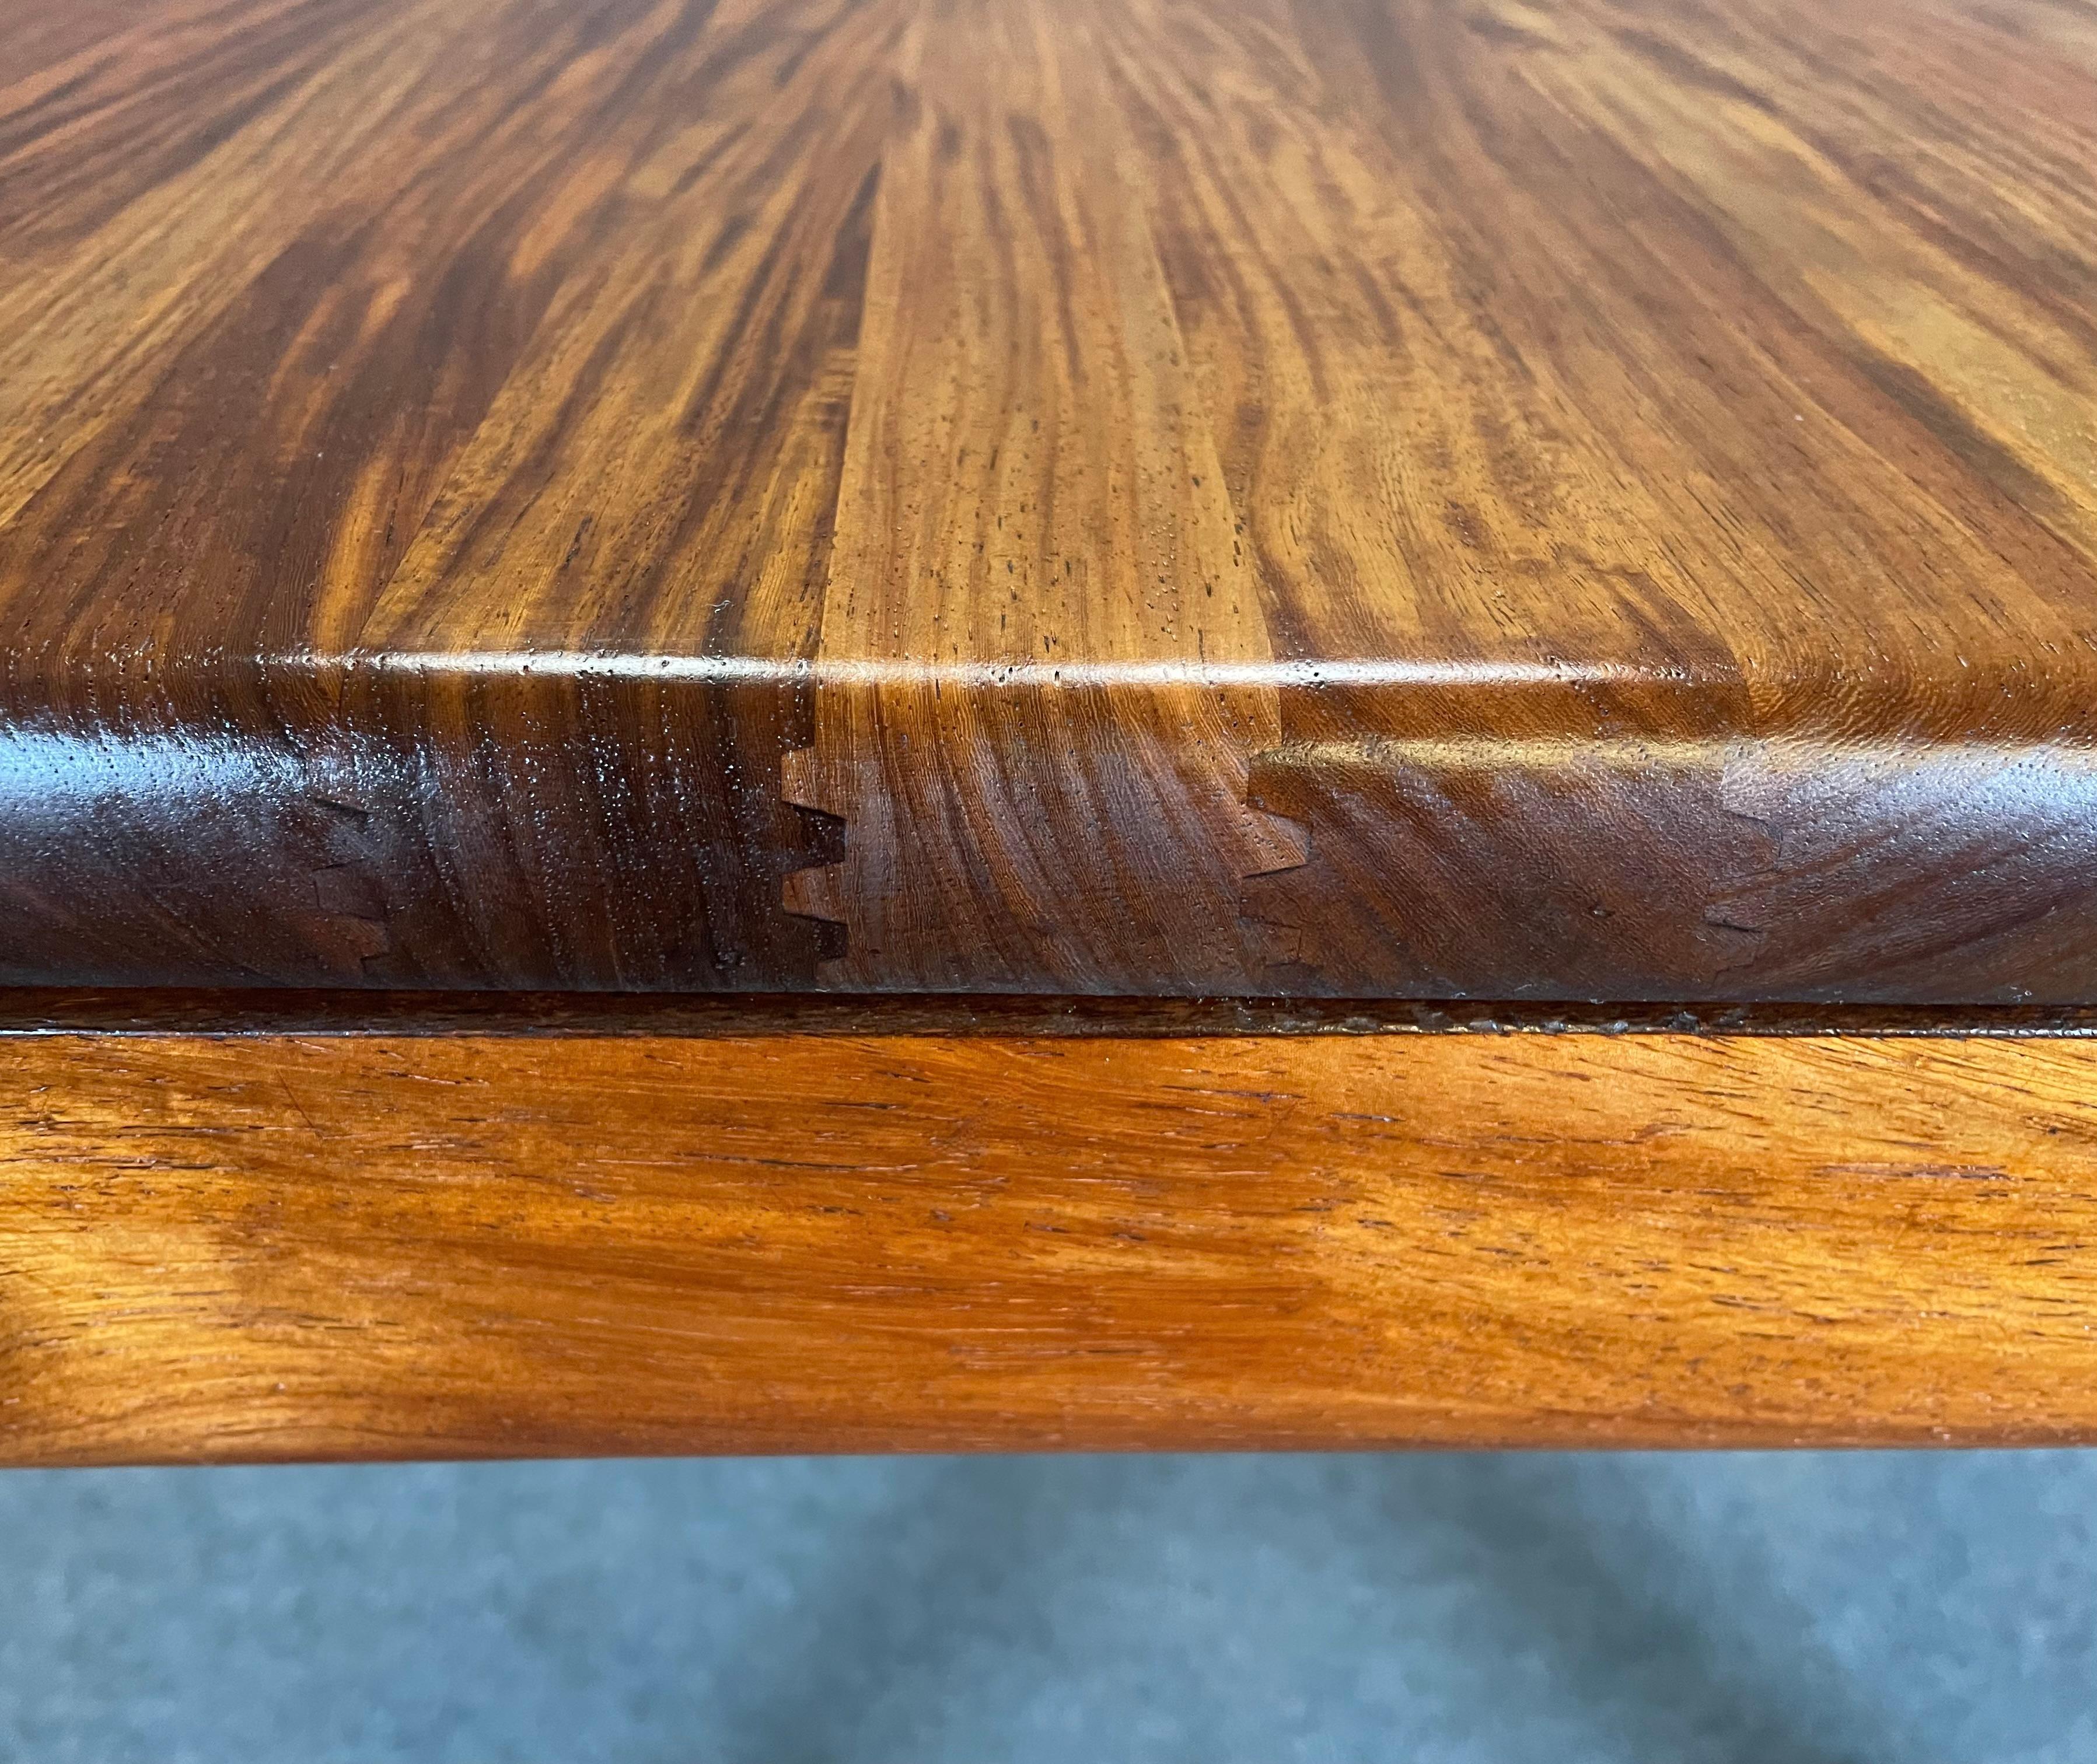 Here is a beautiful scandinavian modern dining table in mahogany manufactured in Denmark in the early 1970's.
This special piece, entirely made out of solid mahogany wood, was recently imported from Europe to California before its refinishing and